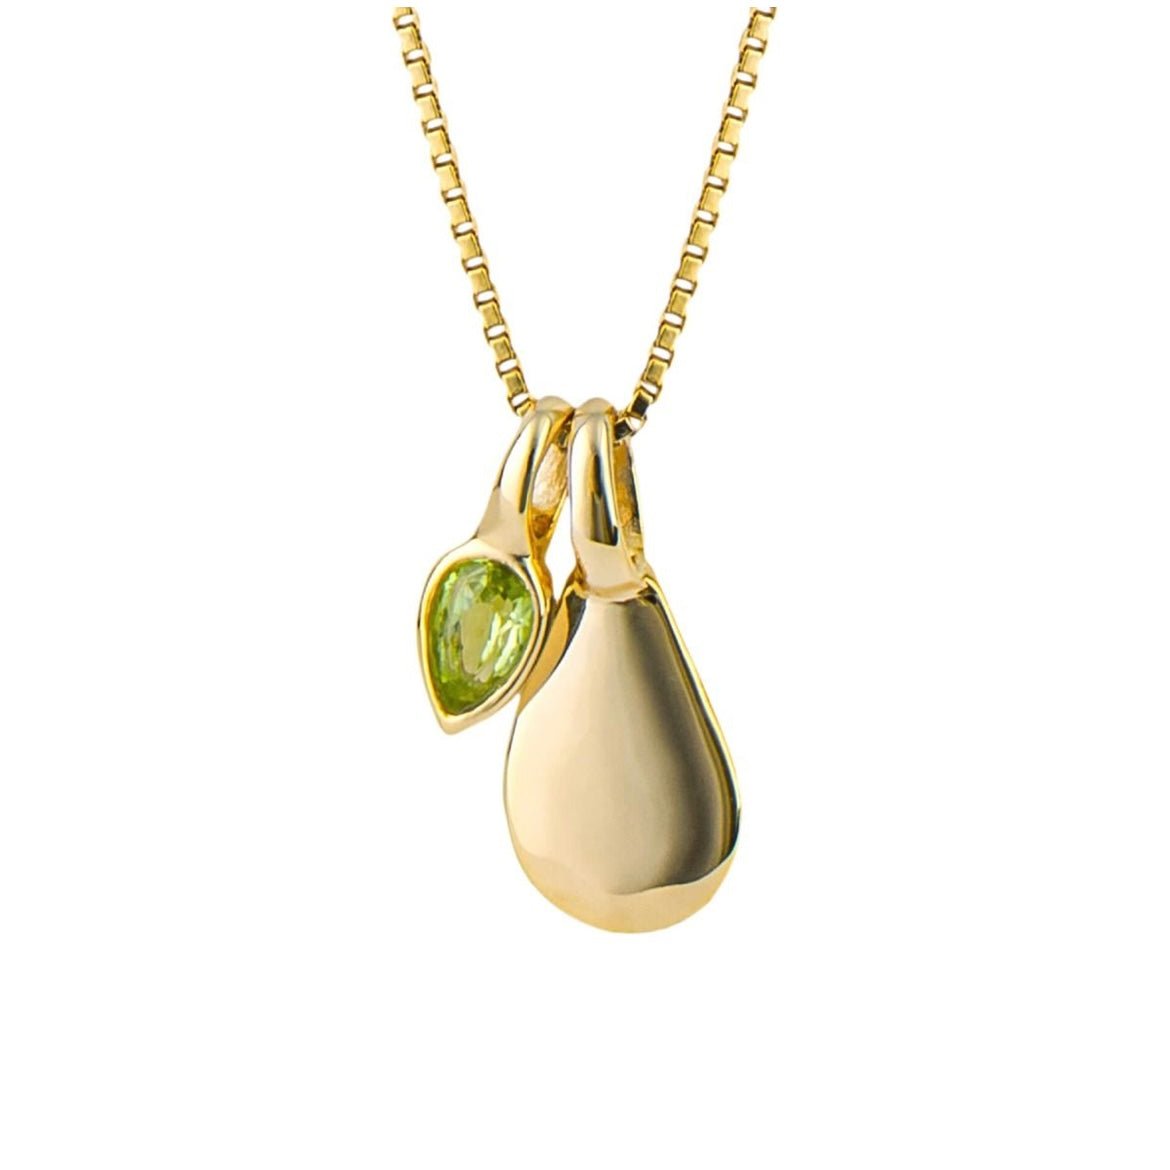 Gold plated pendant with a Peridot drop on a fine chain, Peridot for August. - Collected